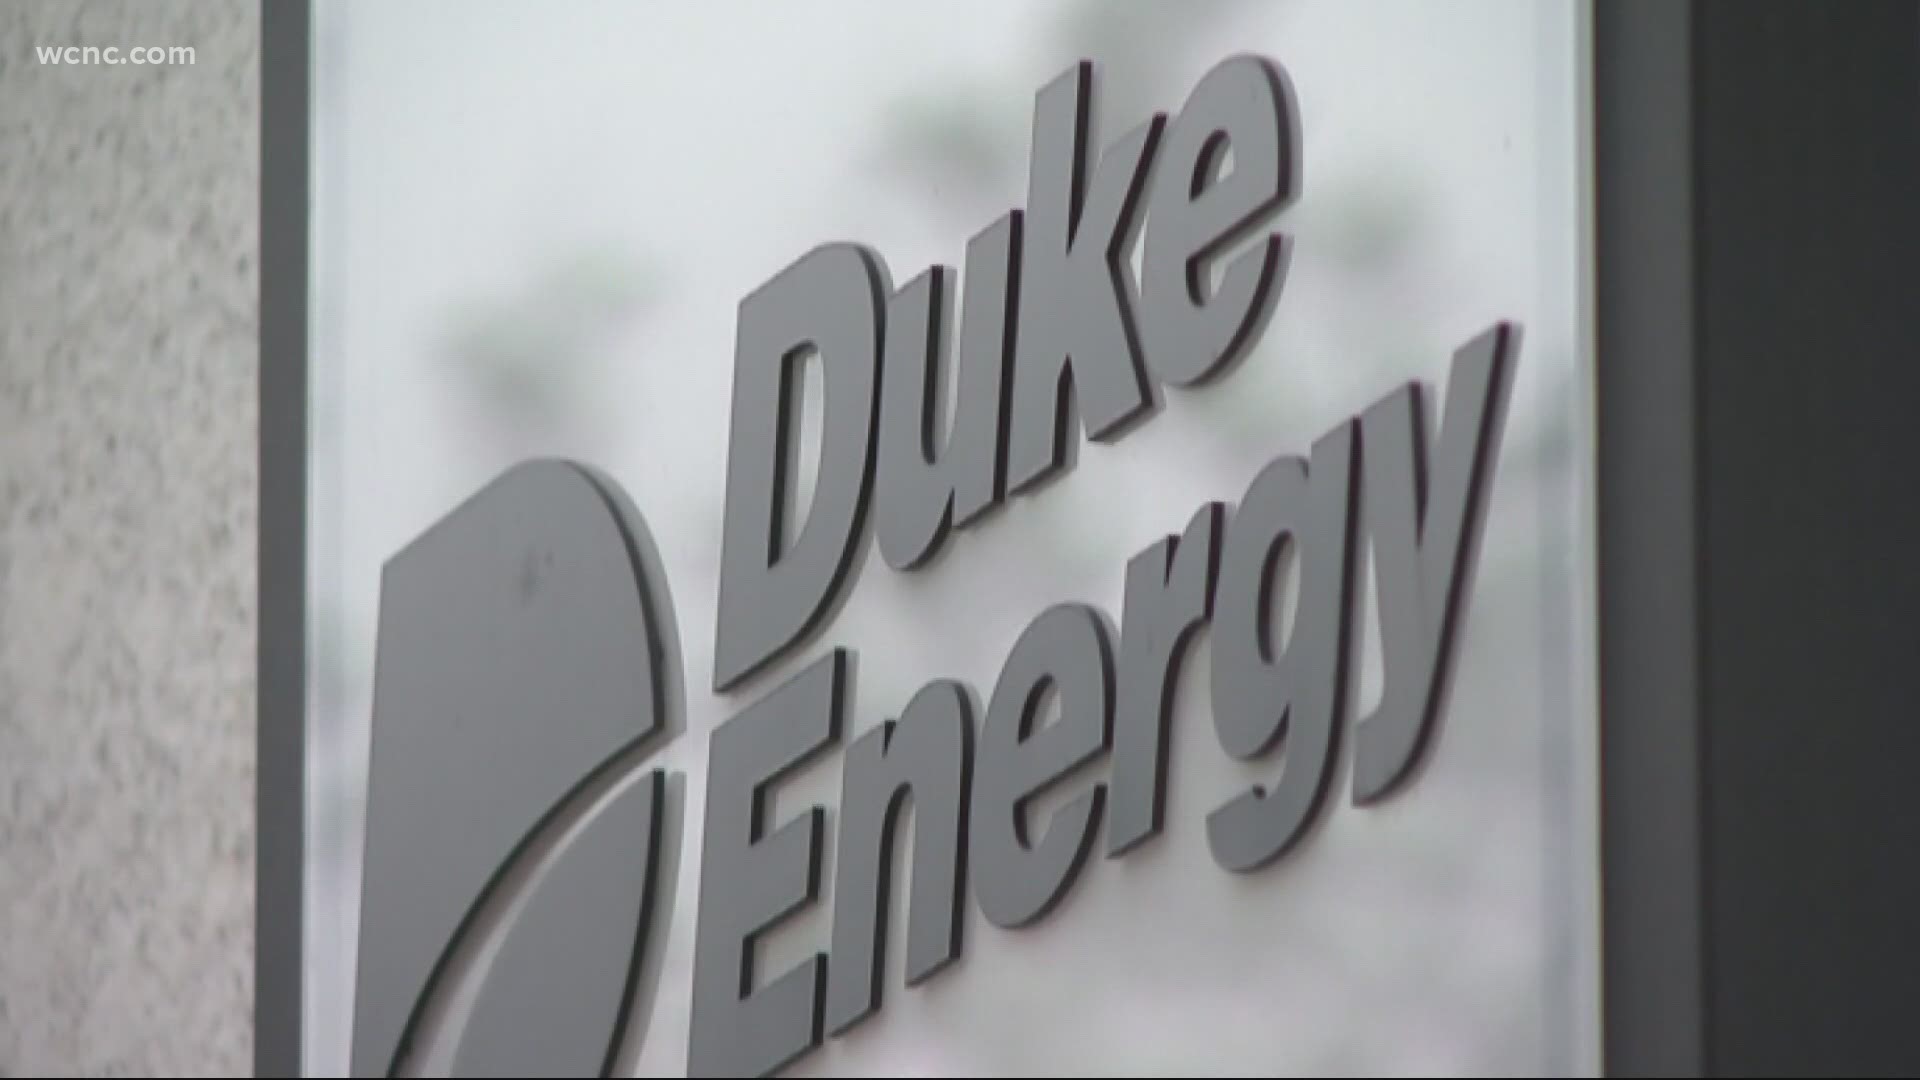 Duke Energy says 79 customers paid out $43,000 to scammers in 2020. That's the most scam attempts ever reported by Duke Energy in a single year.